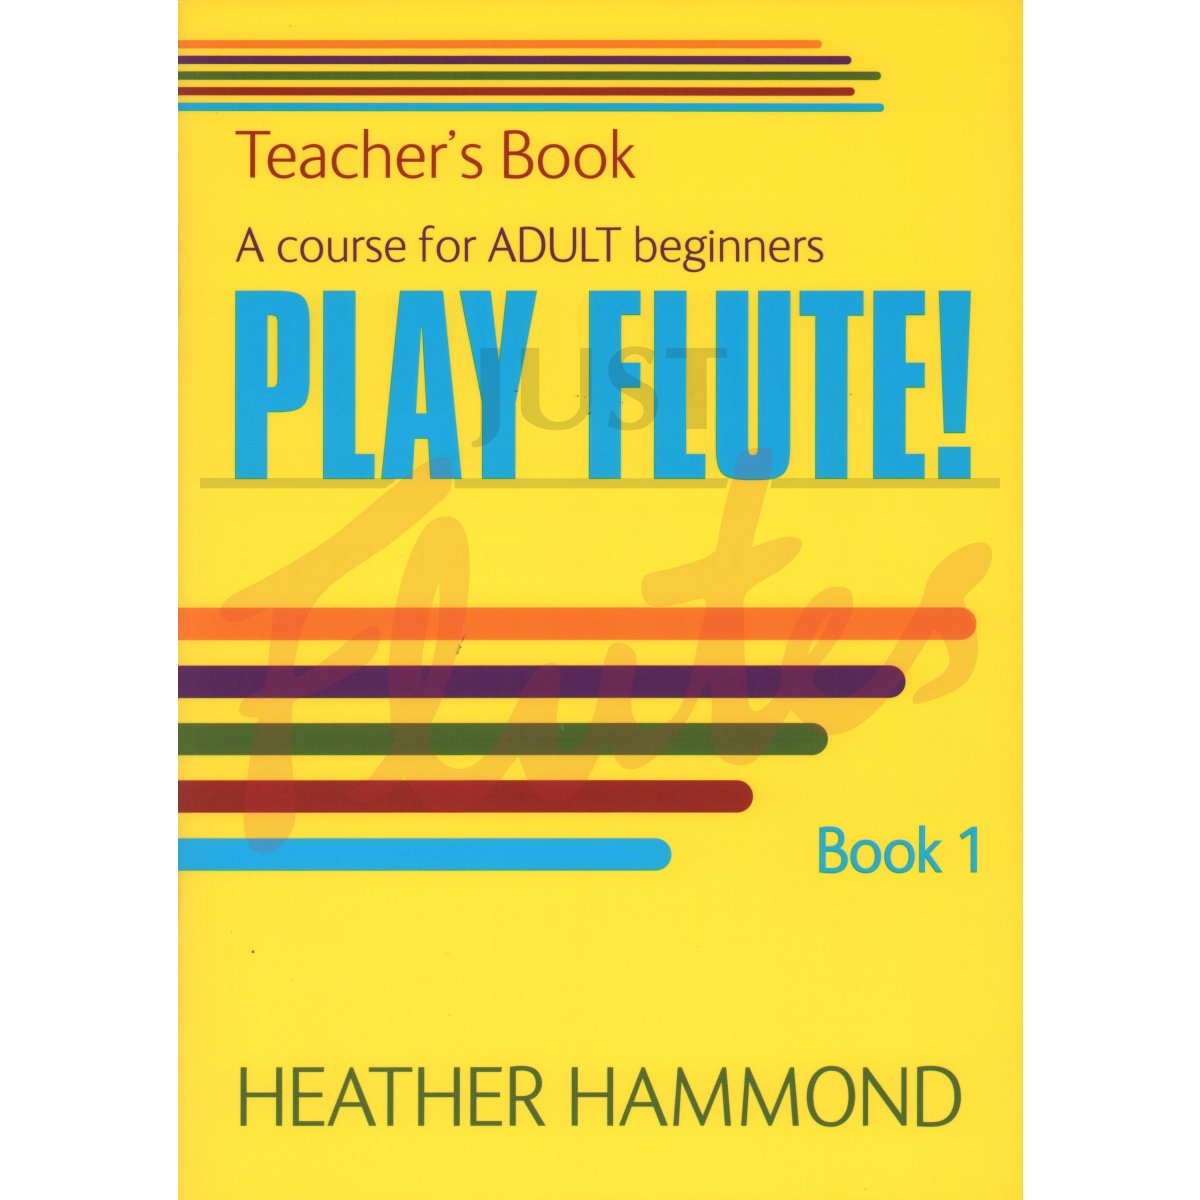 Play Flute! A Course for Adult Beginners [Teacher's Book]